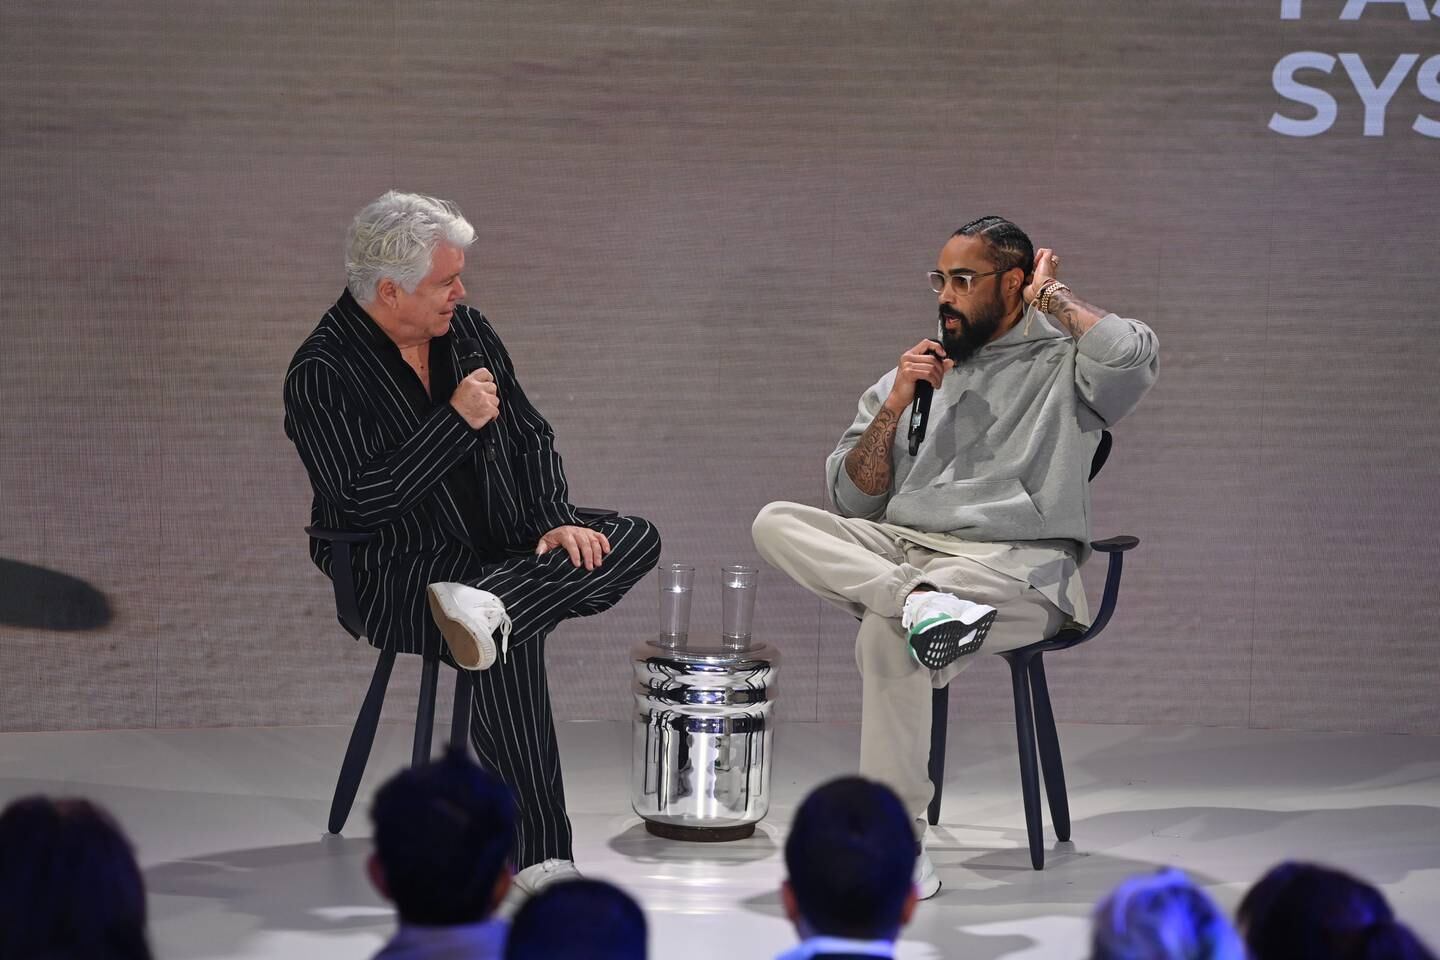 Jerry Lorenzo speaks with Tim Blanks at BoF VOICES 2022 at Soho Farmhouse.